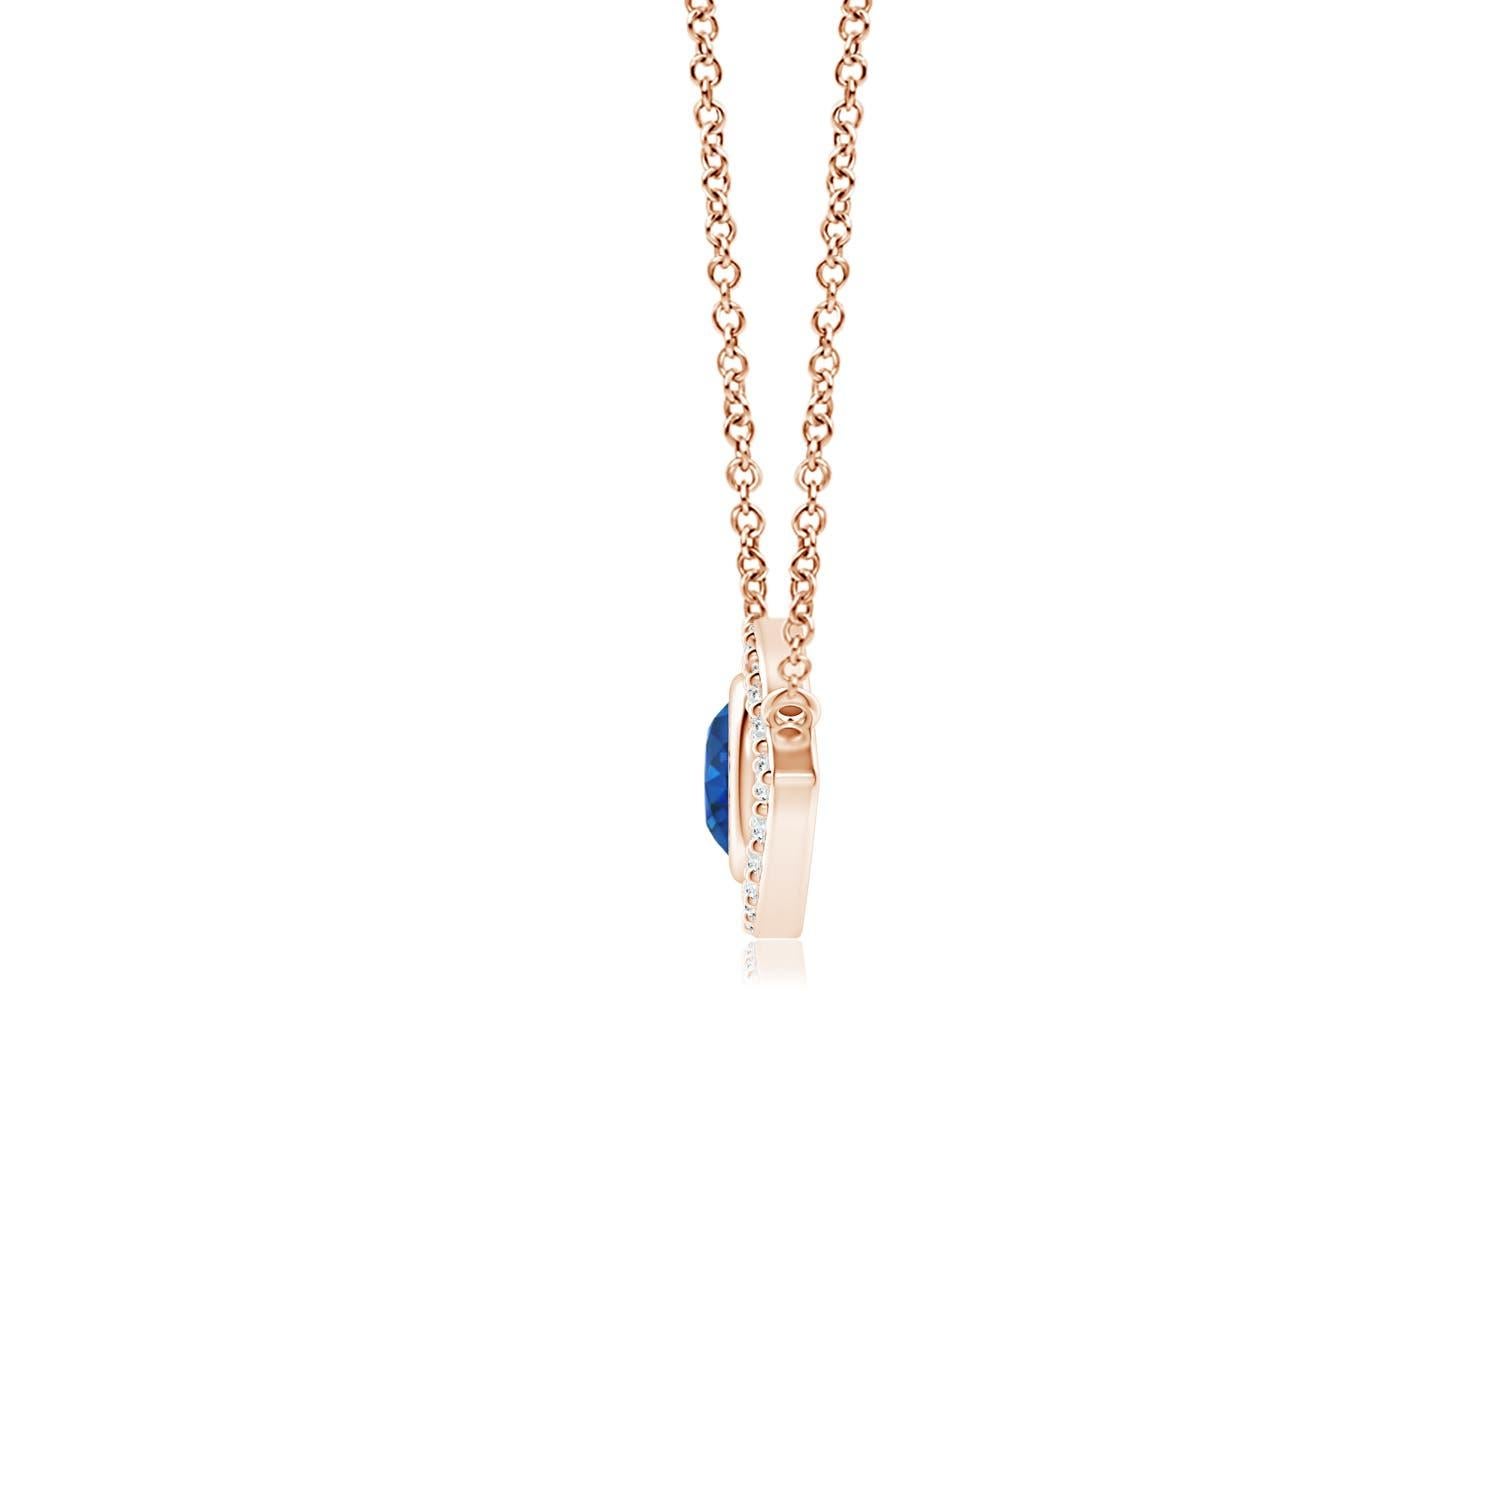 Hanging gracefully from a shiny metal bale is a diamond studded frame with a round sapphire bezel set at the center. The sparkling diamonds create a compelling contrast against the deep blue sapphire. Crafted in 14k rose gold, this sapphire evil eye